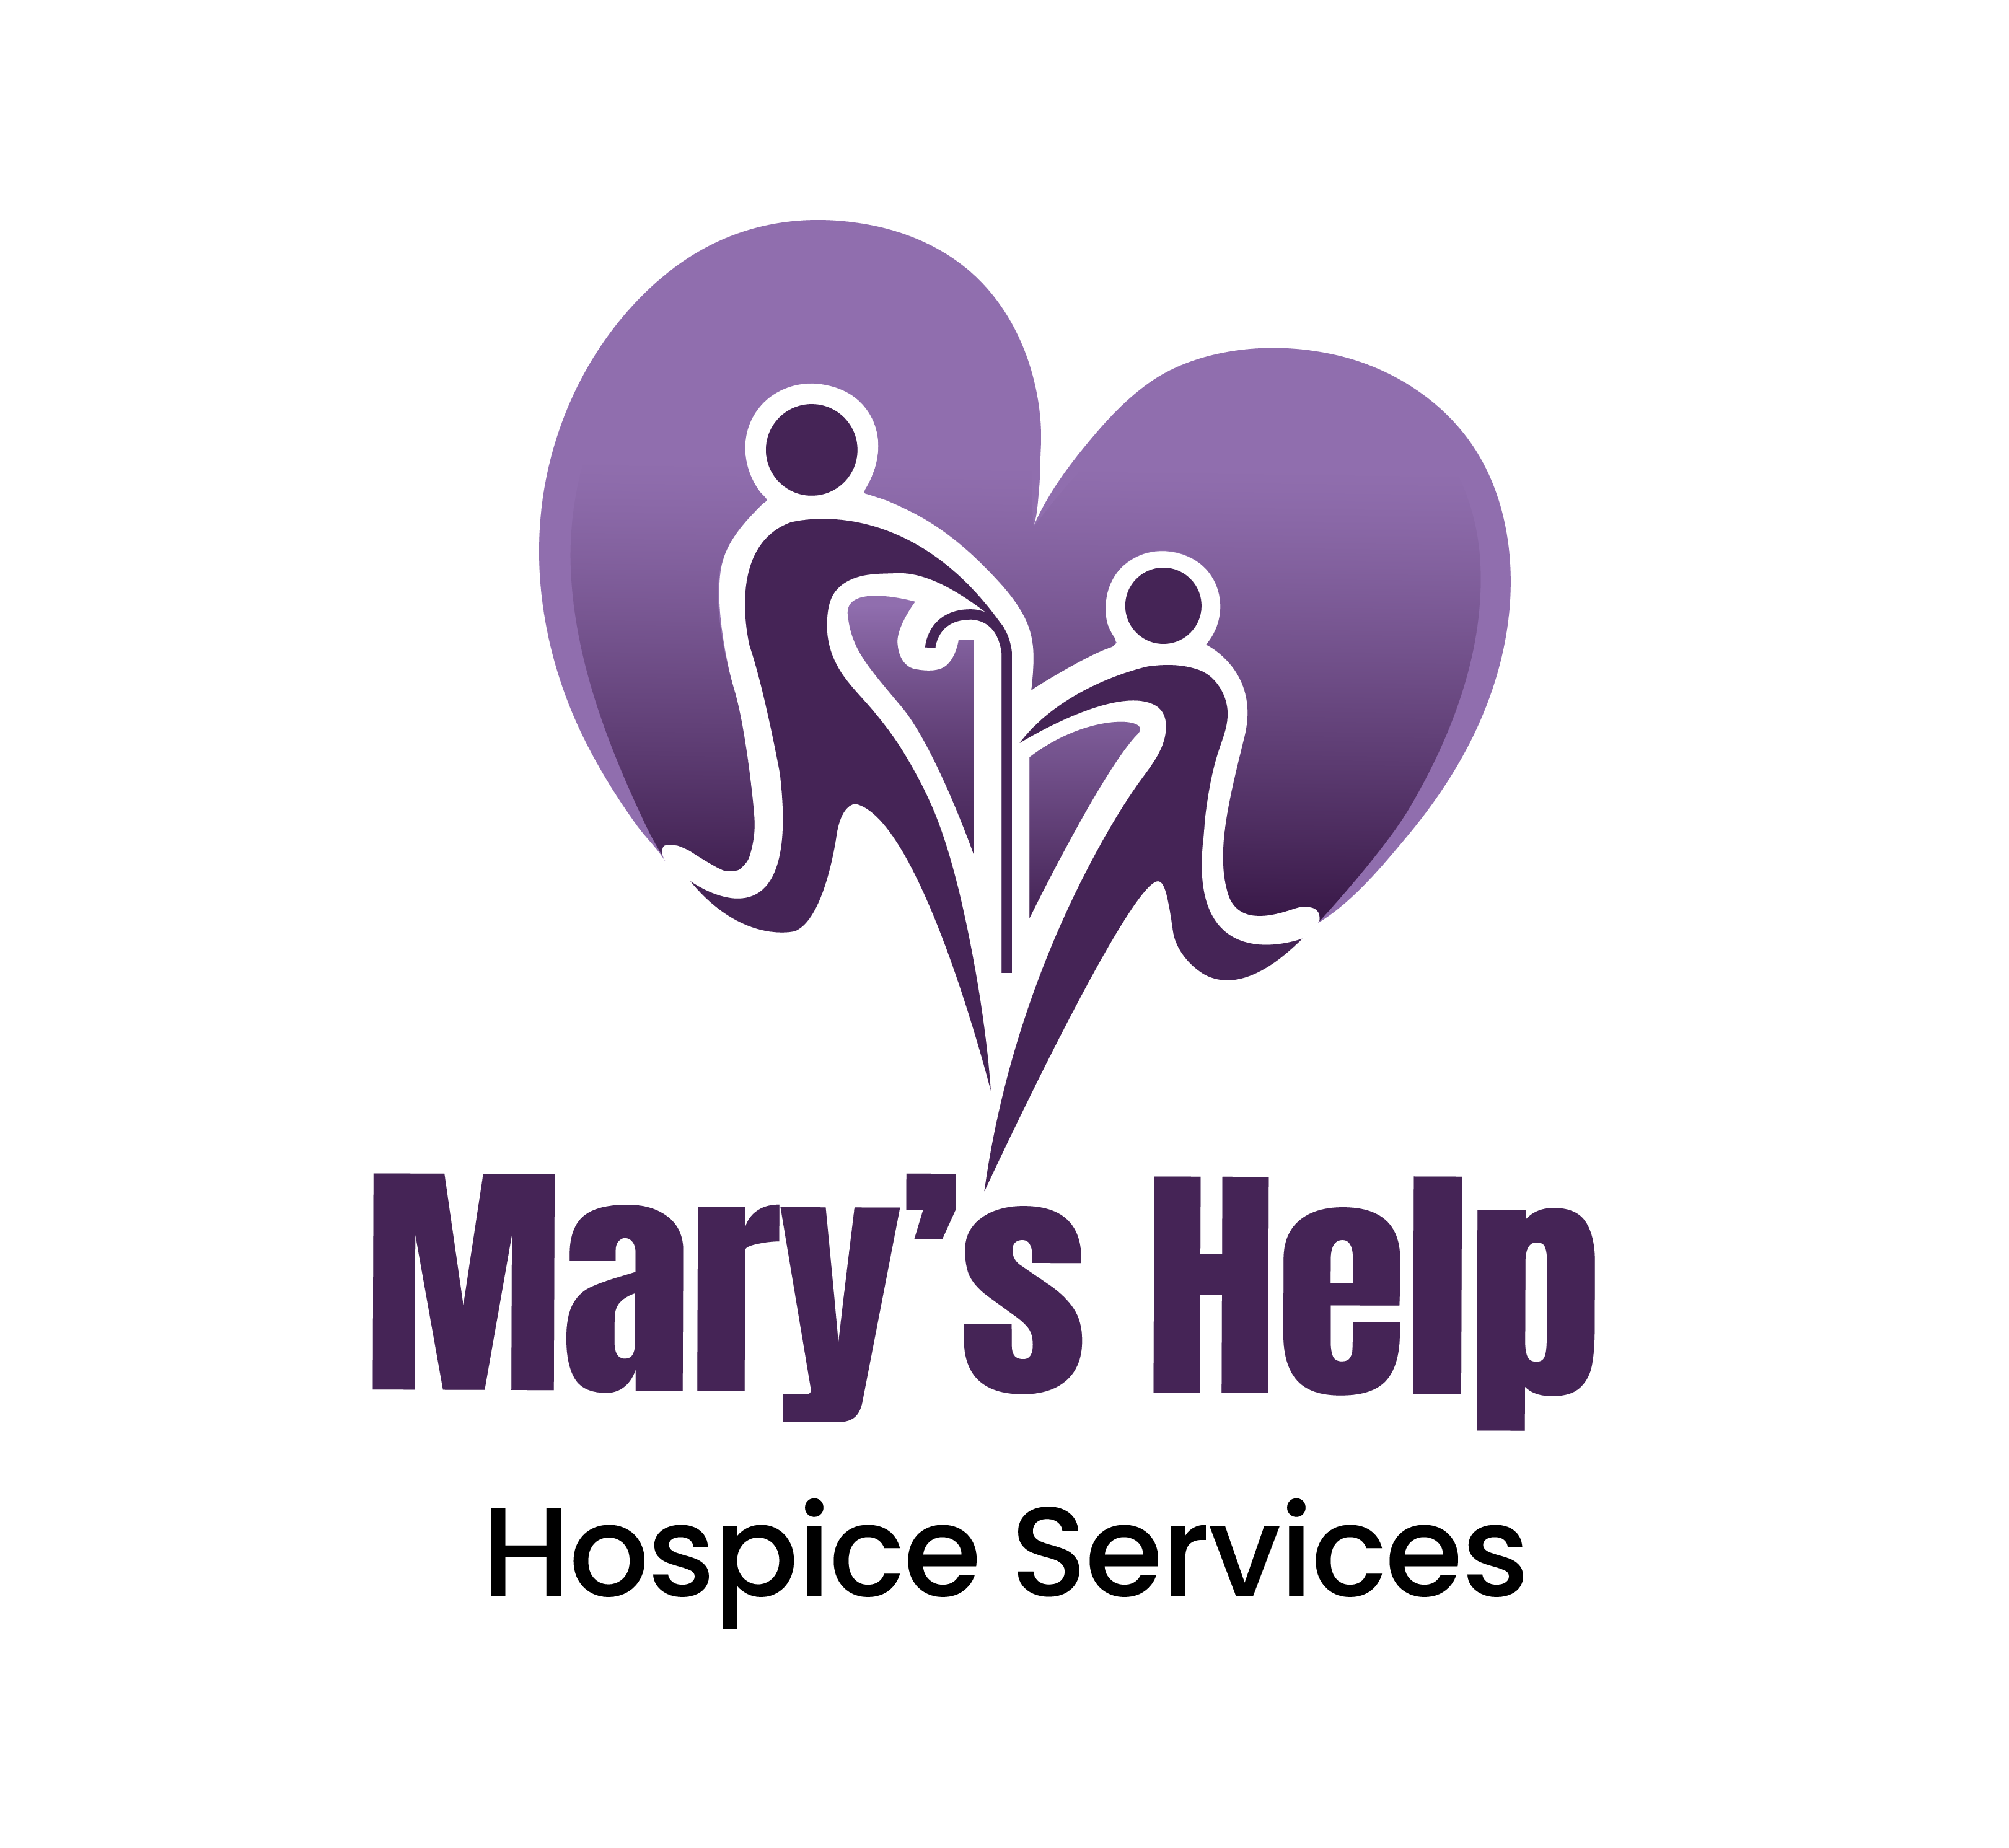 Mary's Help Hospice Services